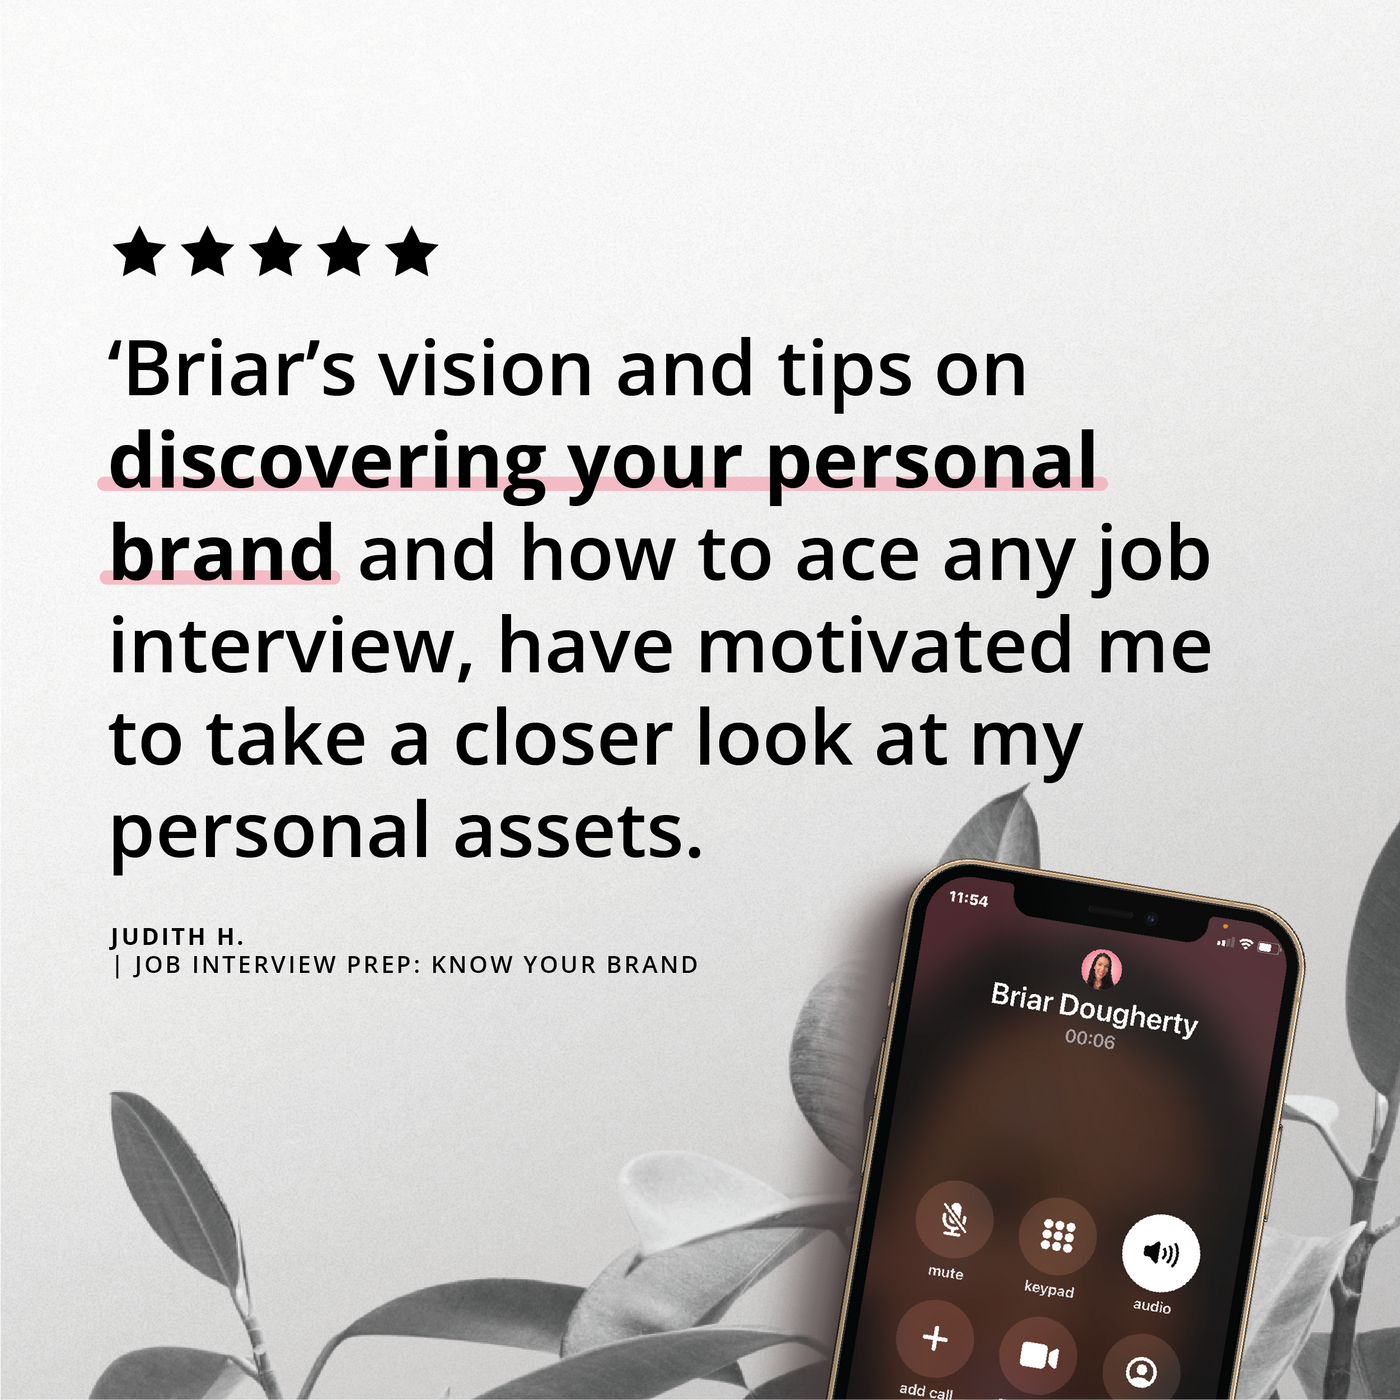 phone screen displaying a ongoing call with Briar Dougherty, on a black and white plant picture with a testimonial quote above